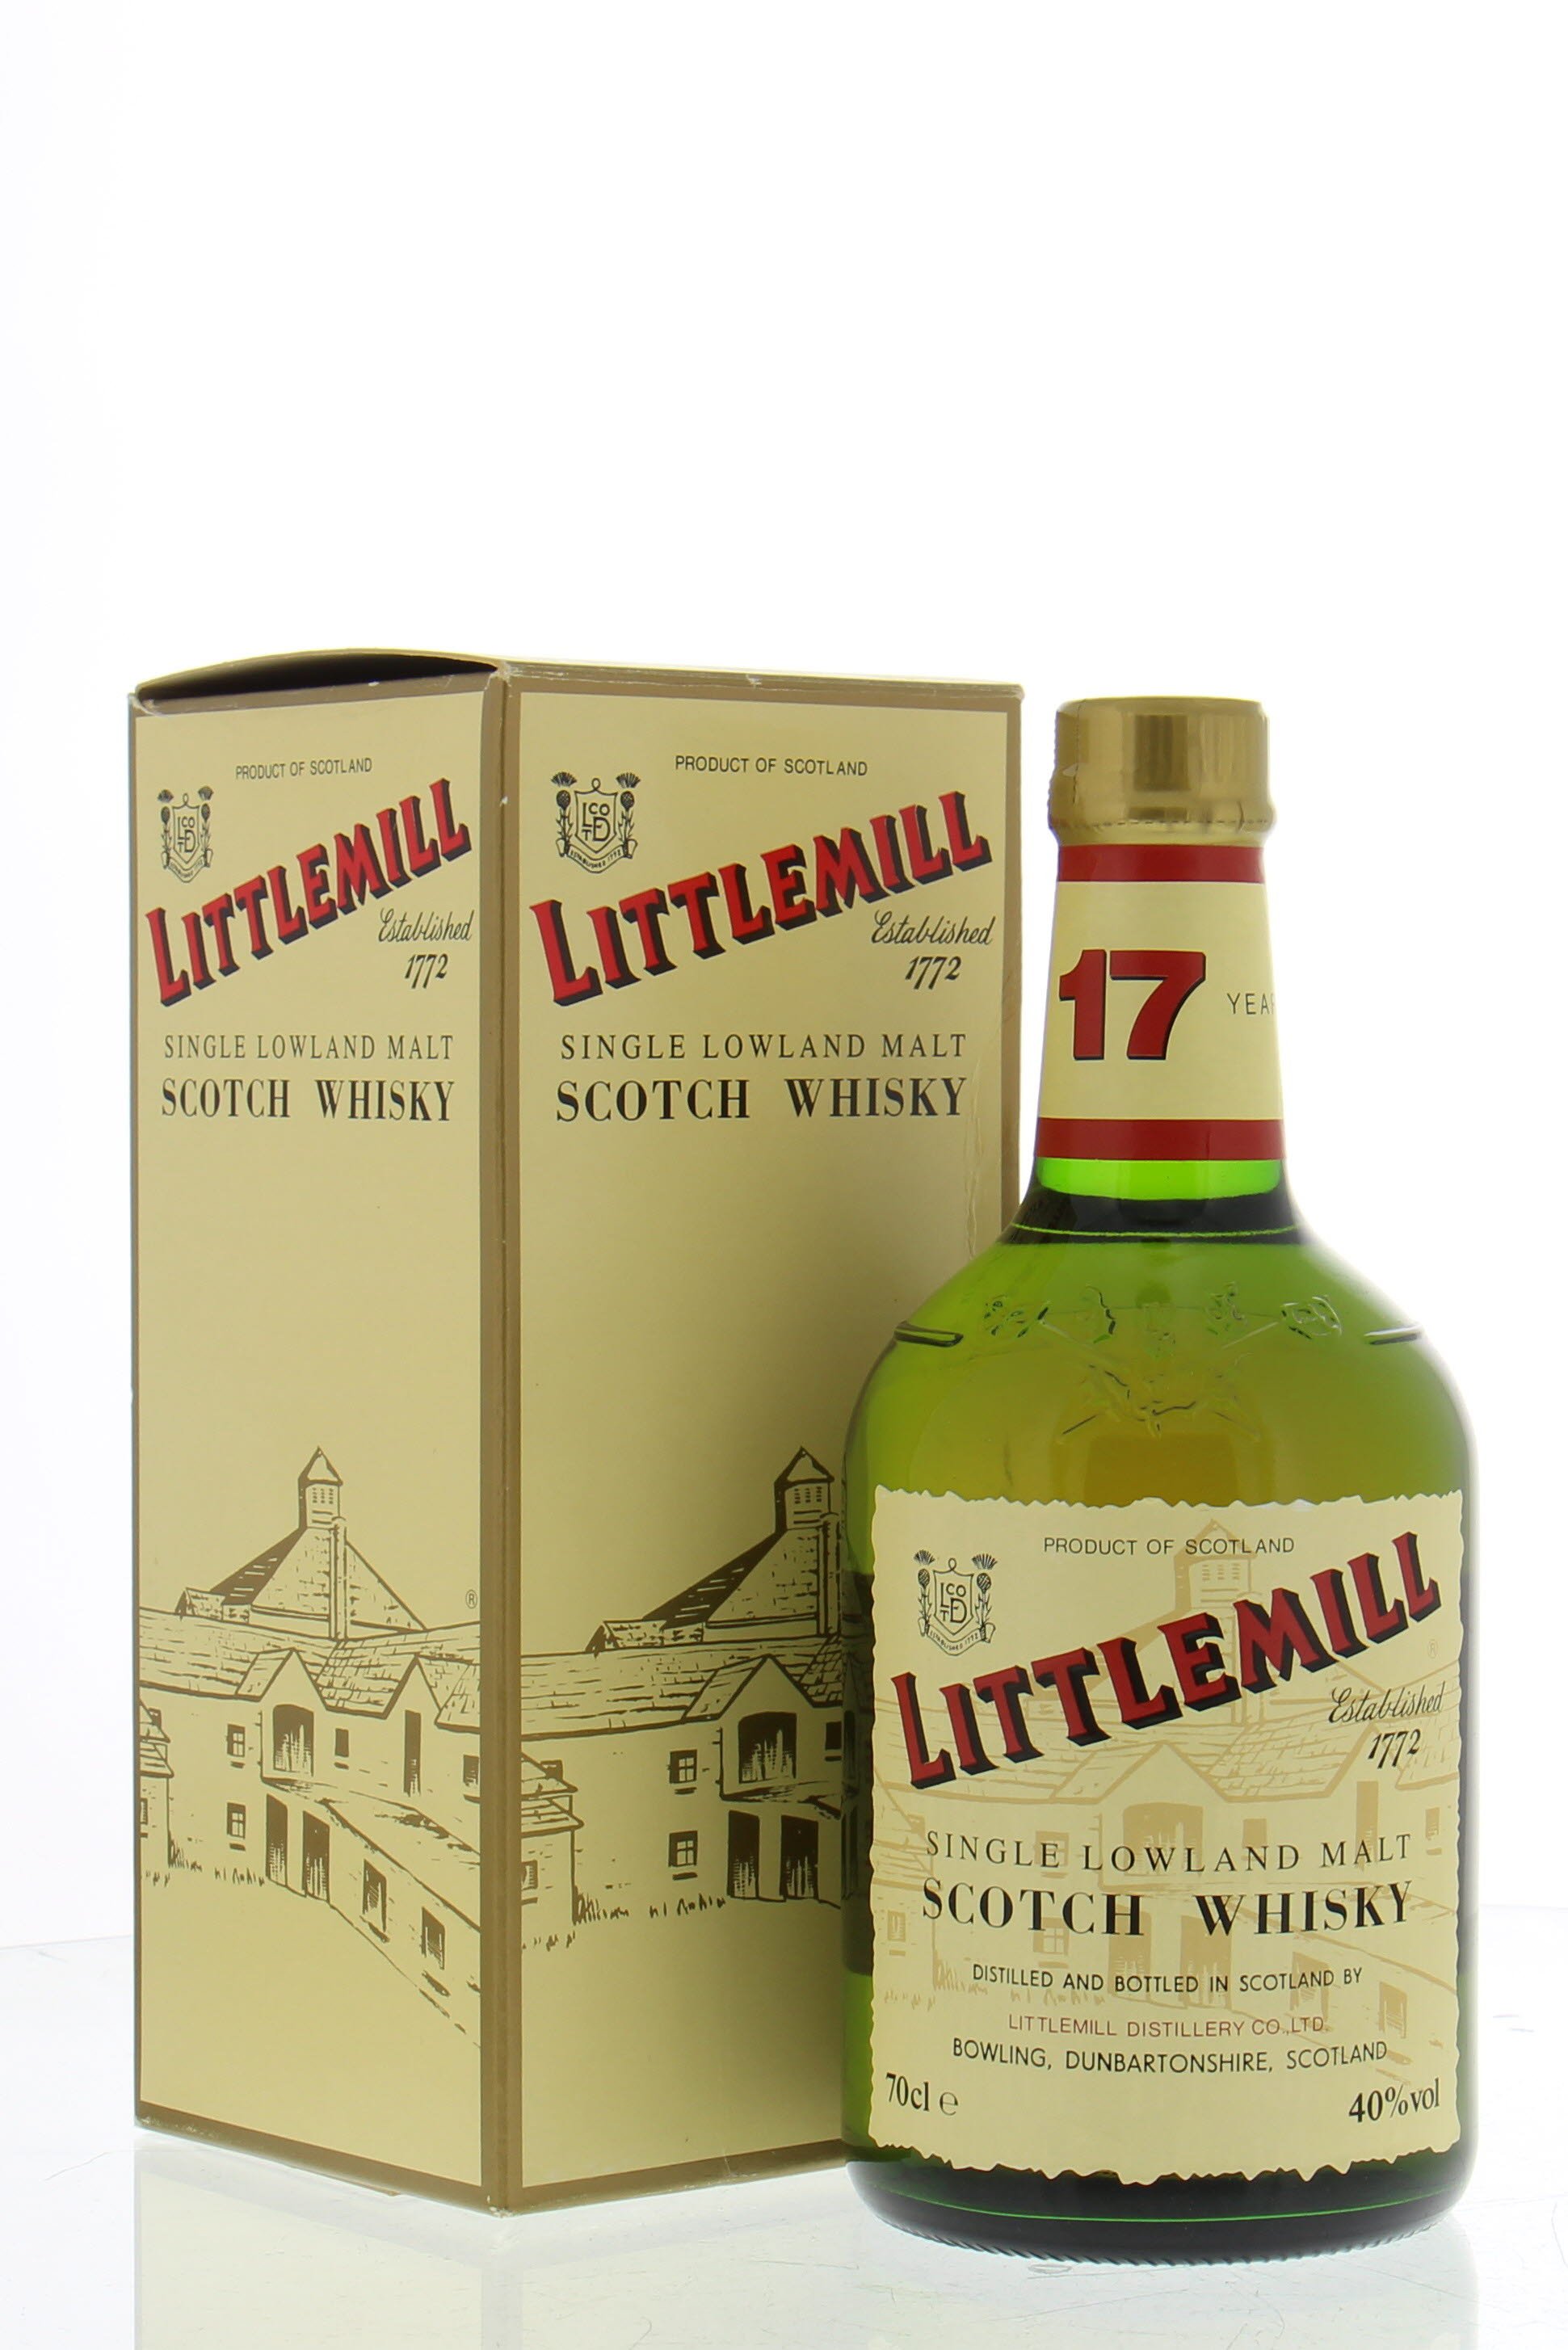 Littlemill - 17 Years Old Green Dumpy 40% NV In Original Container